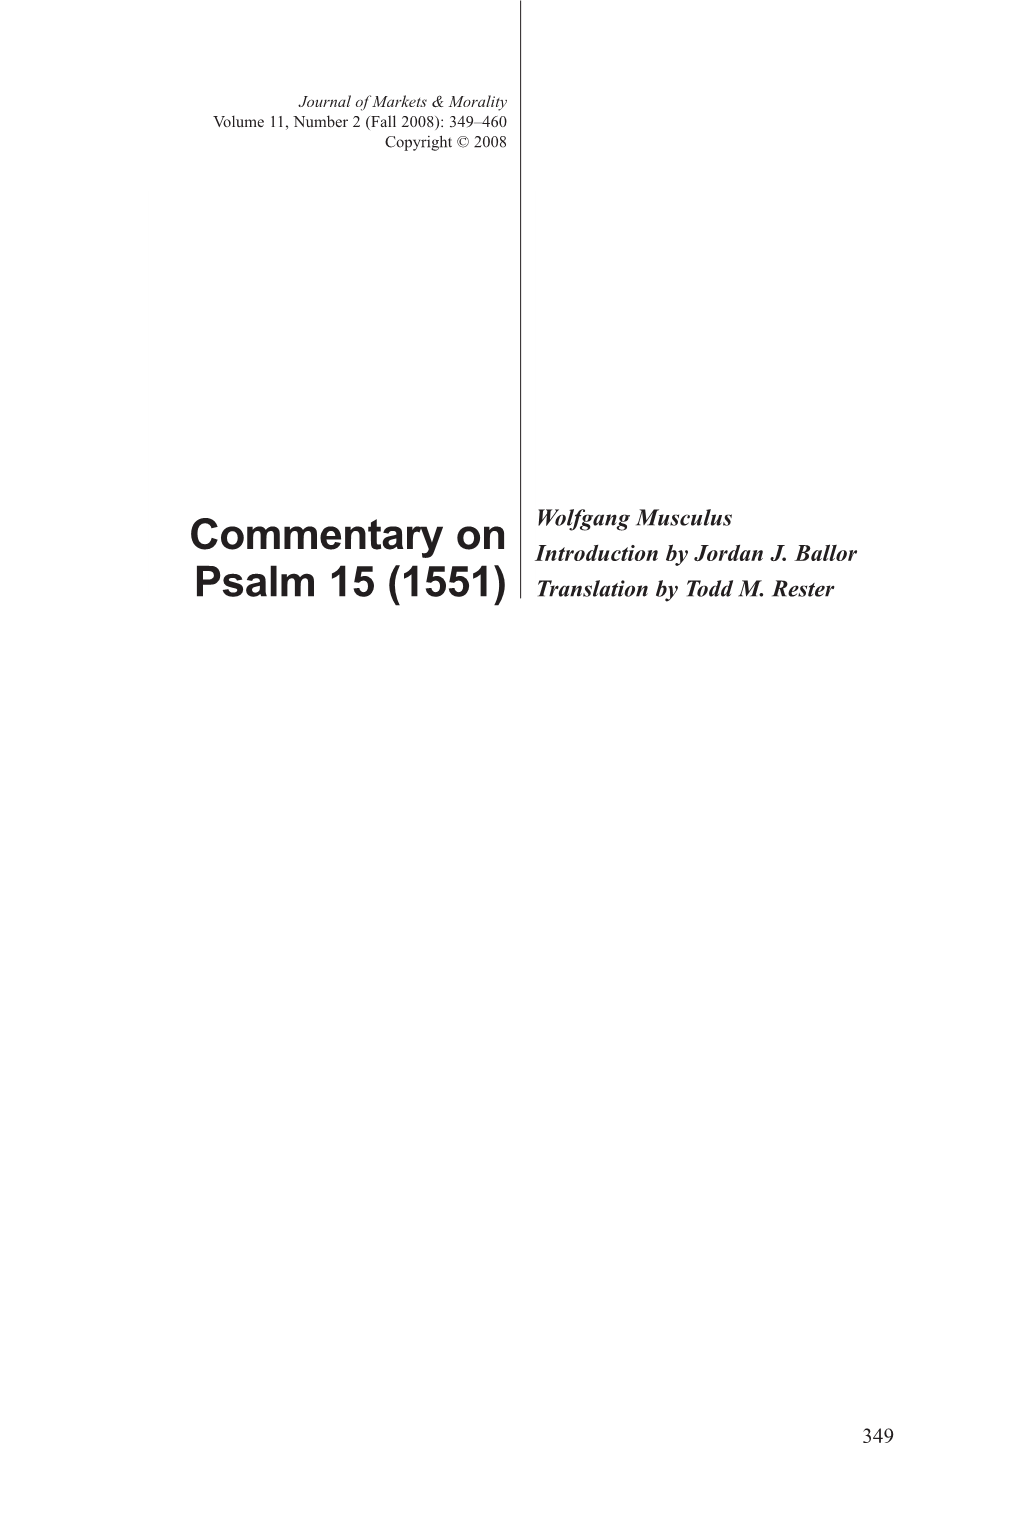 Commentary on Psalm 15 (1551)